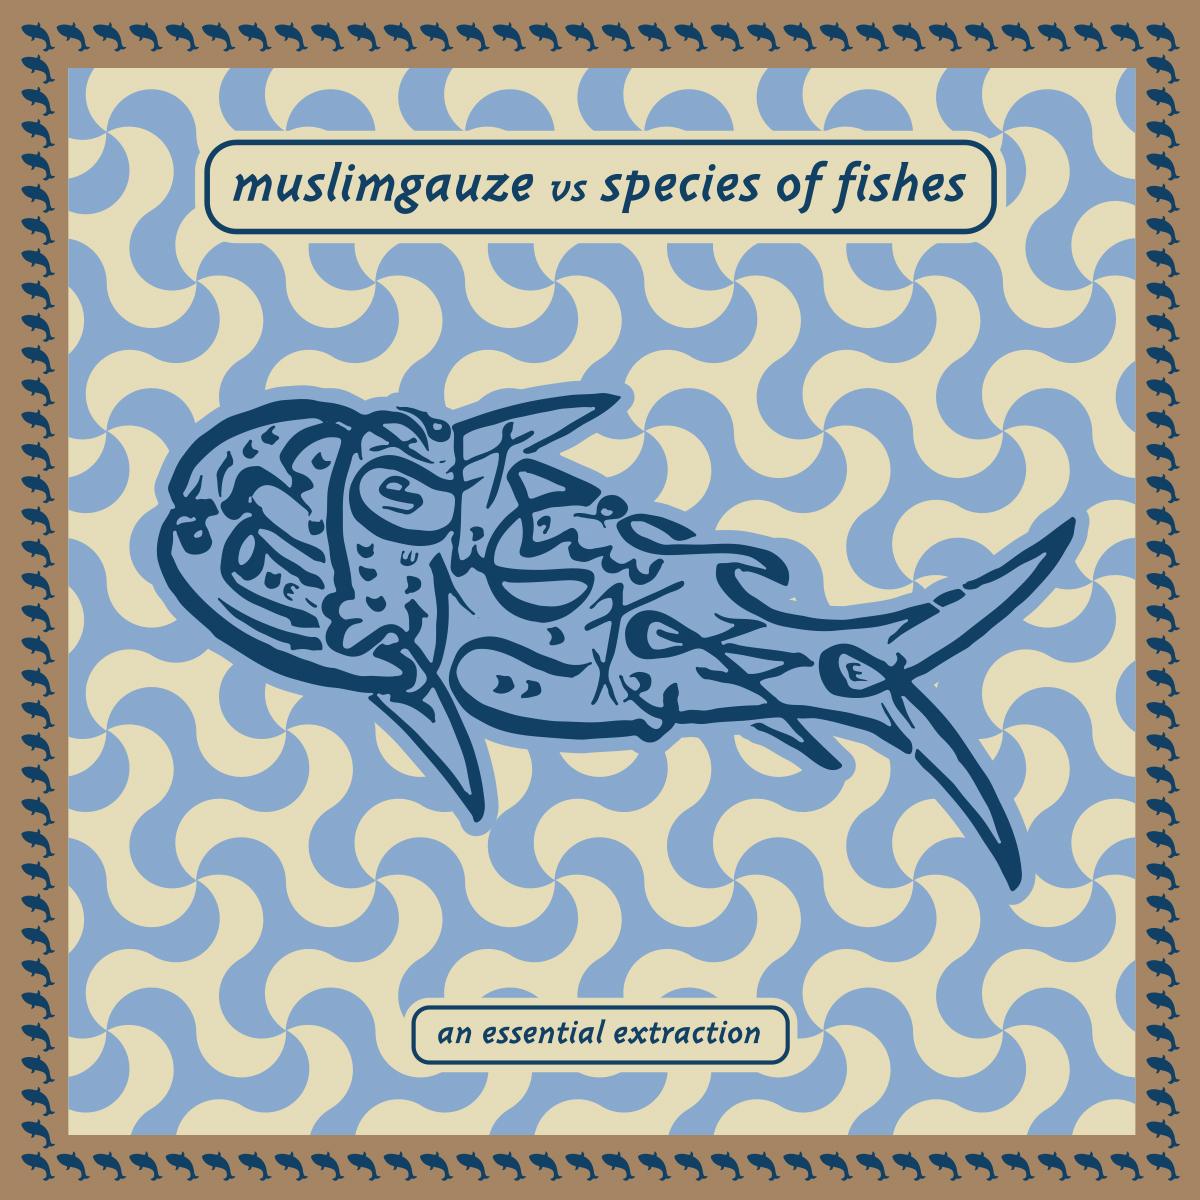 Species of Fishes – Muslimgauze vs Species Of Fishes